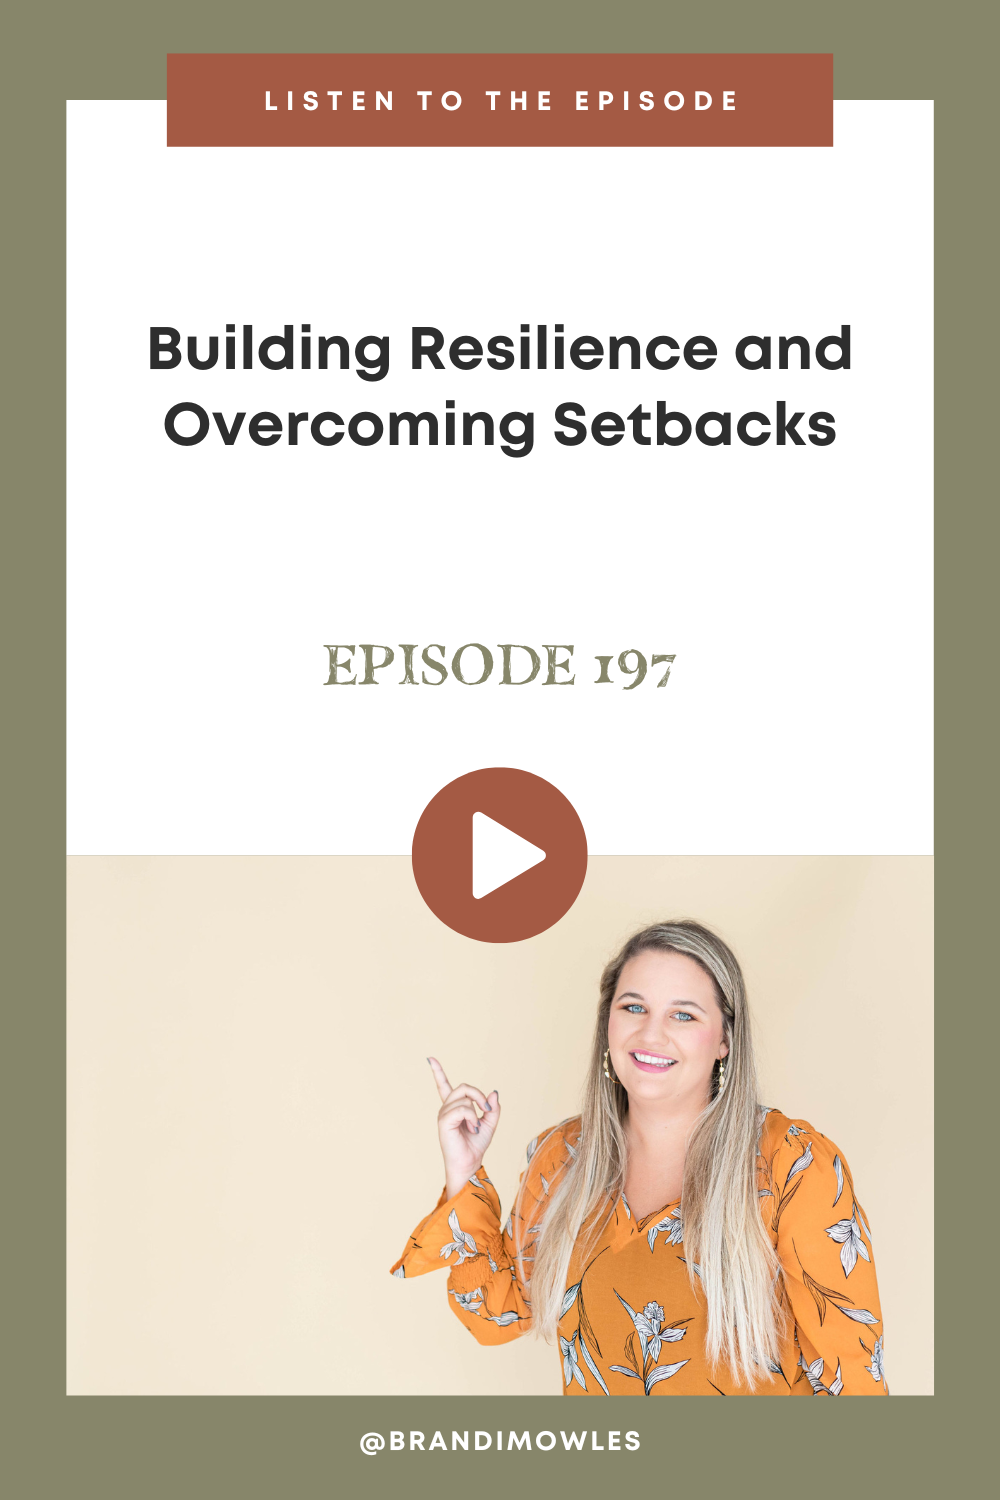 Brandi Mowles podcast feature about resiliency in your business